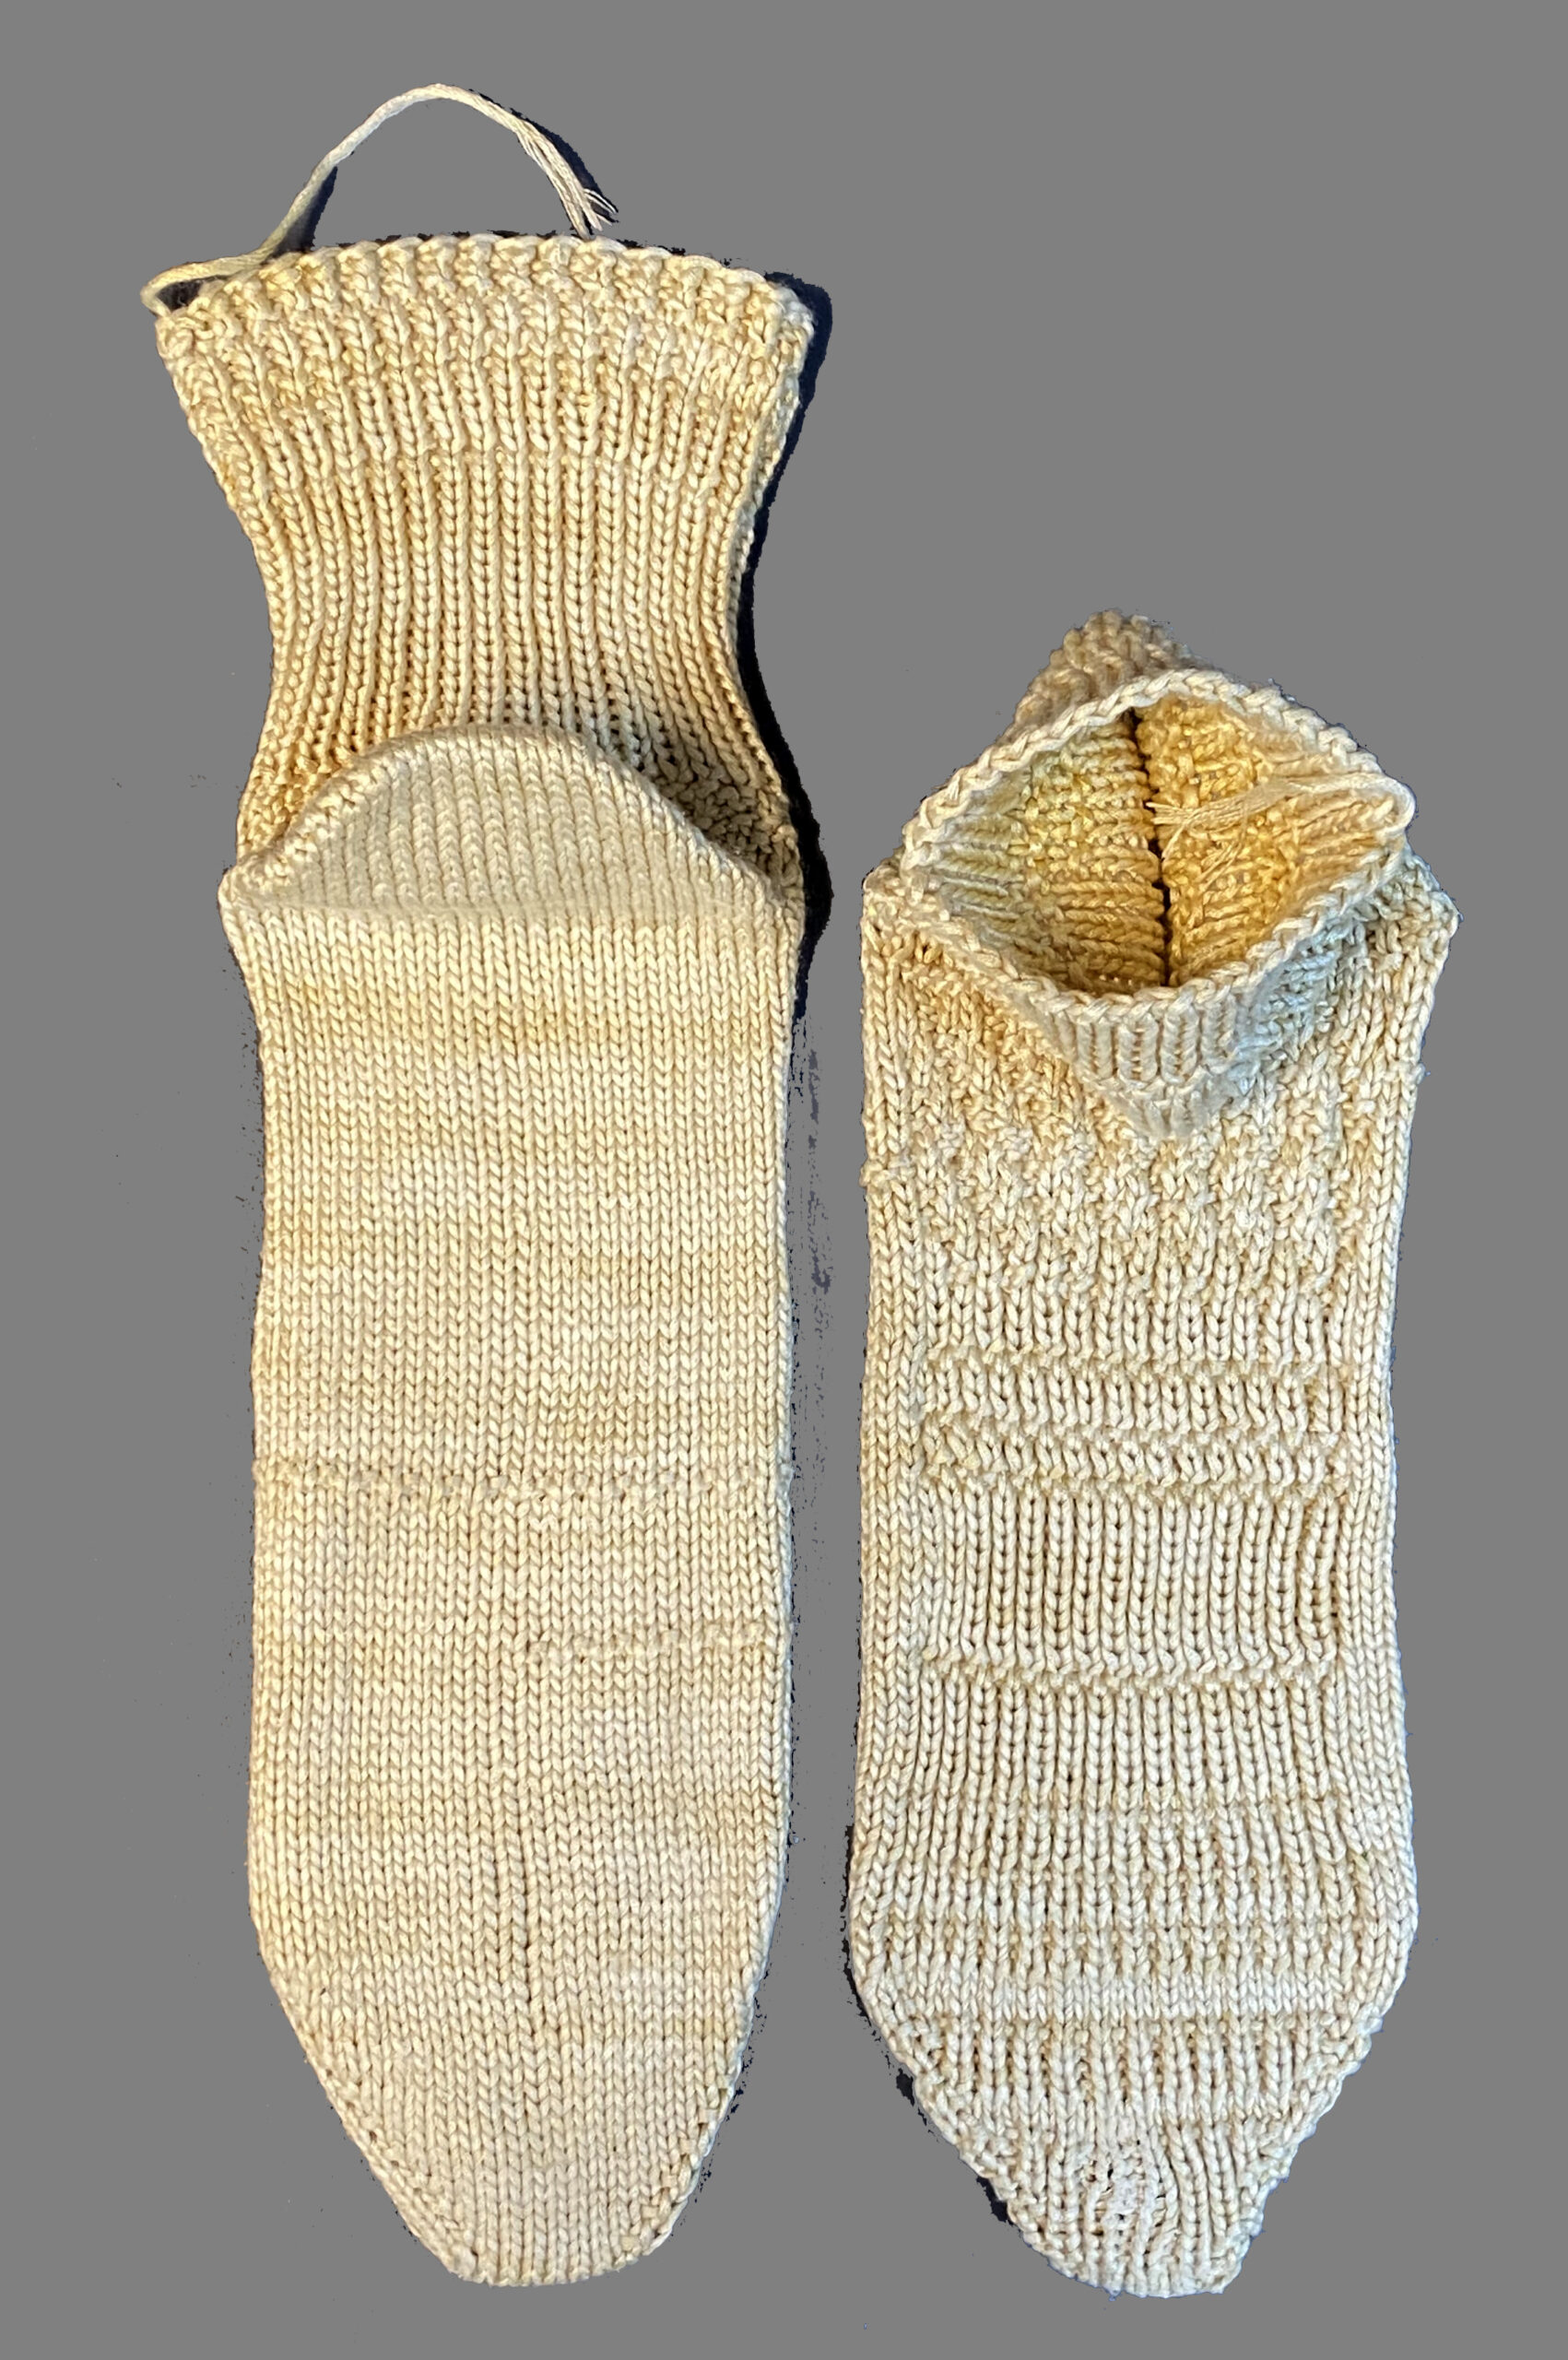 A pair of pale yellow socks on a grey background. They have a subtle striping and some offset rib texture bands. One is sitting up, the other is laying face down.